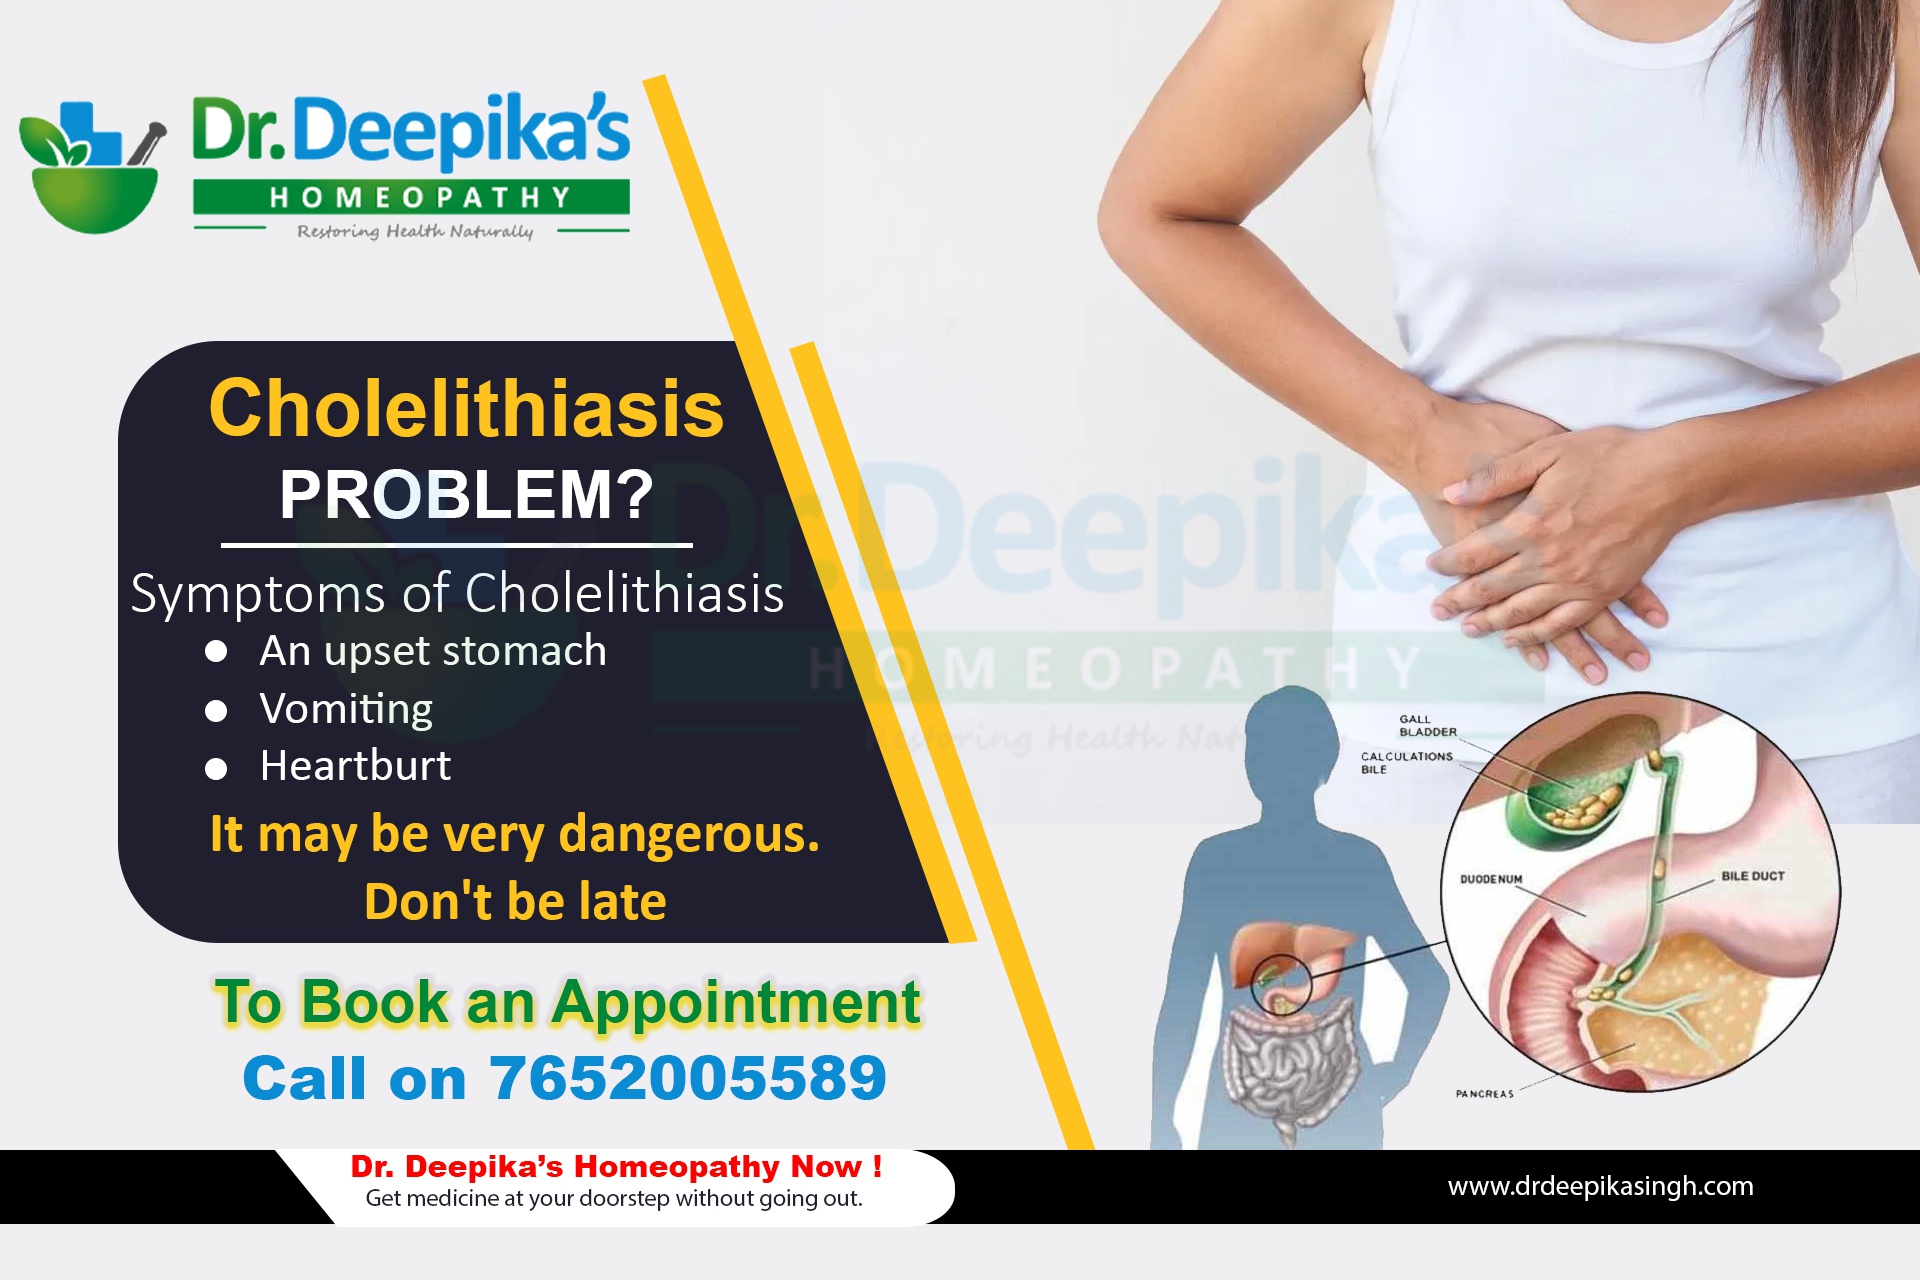 What is Gallstones / Cholelithiasis disorder or the presence of gallbladder stones? & How it can be cured naturally using homeopathy?